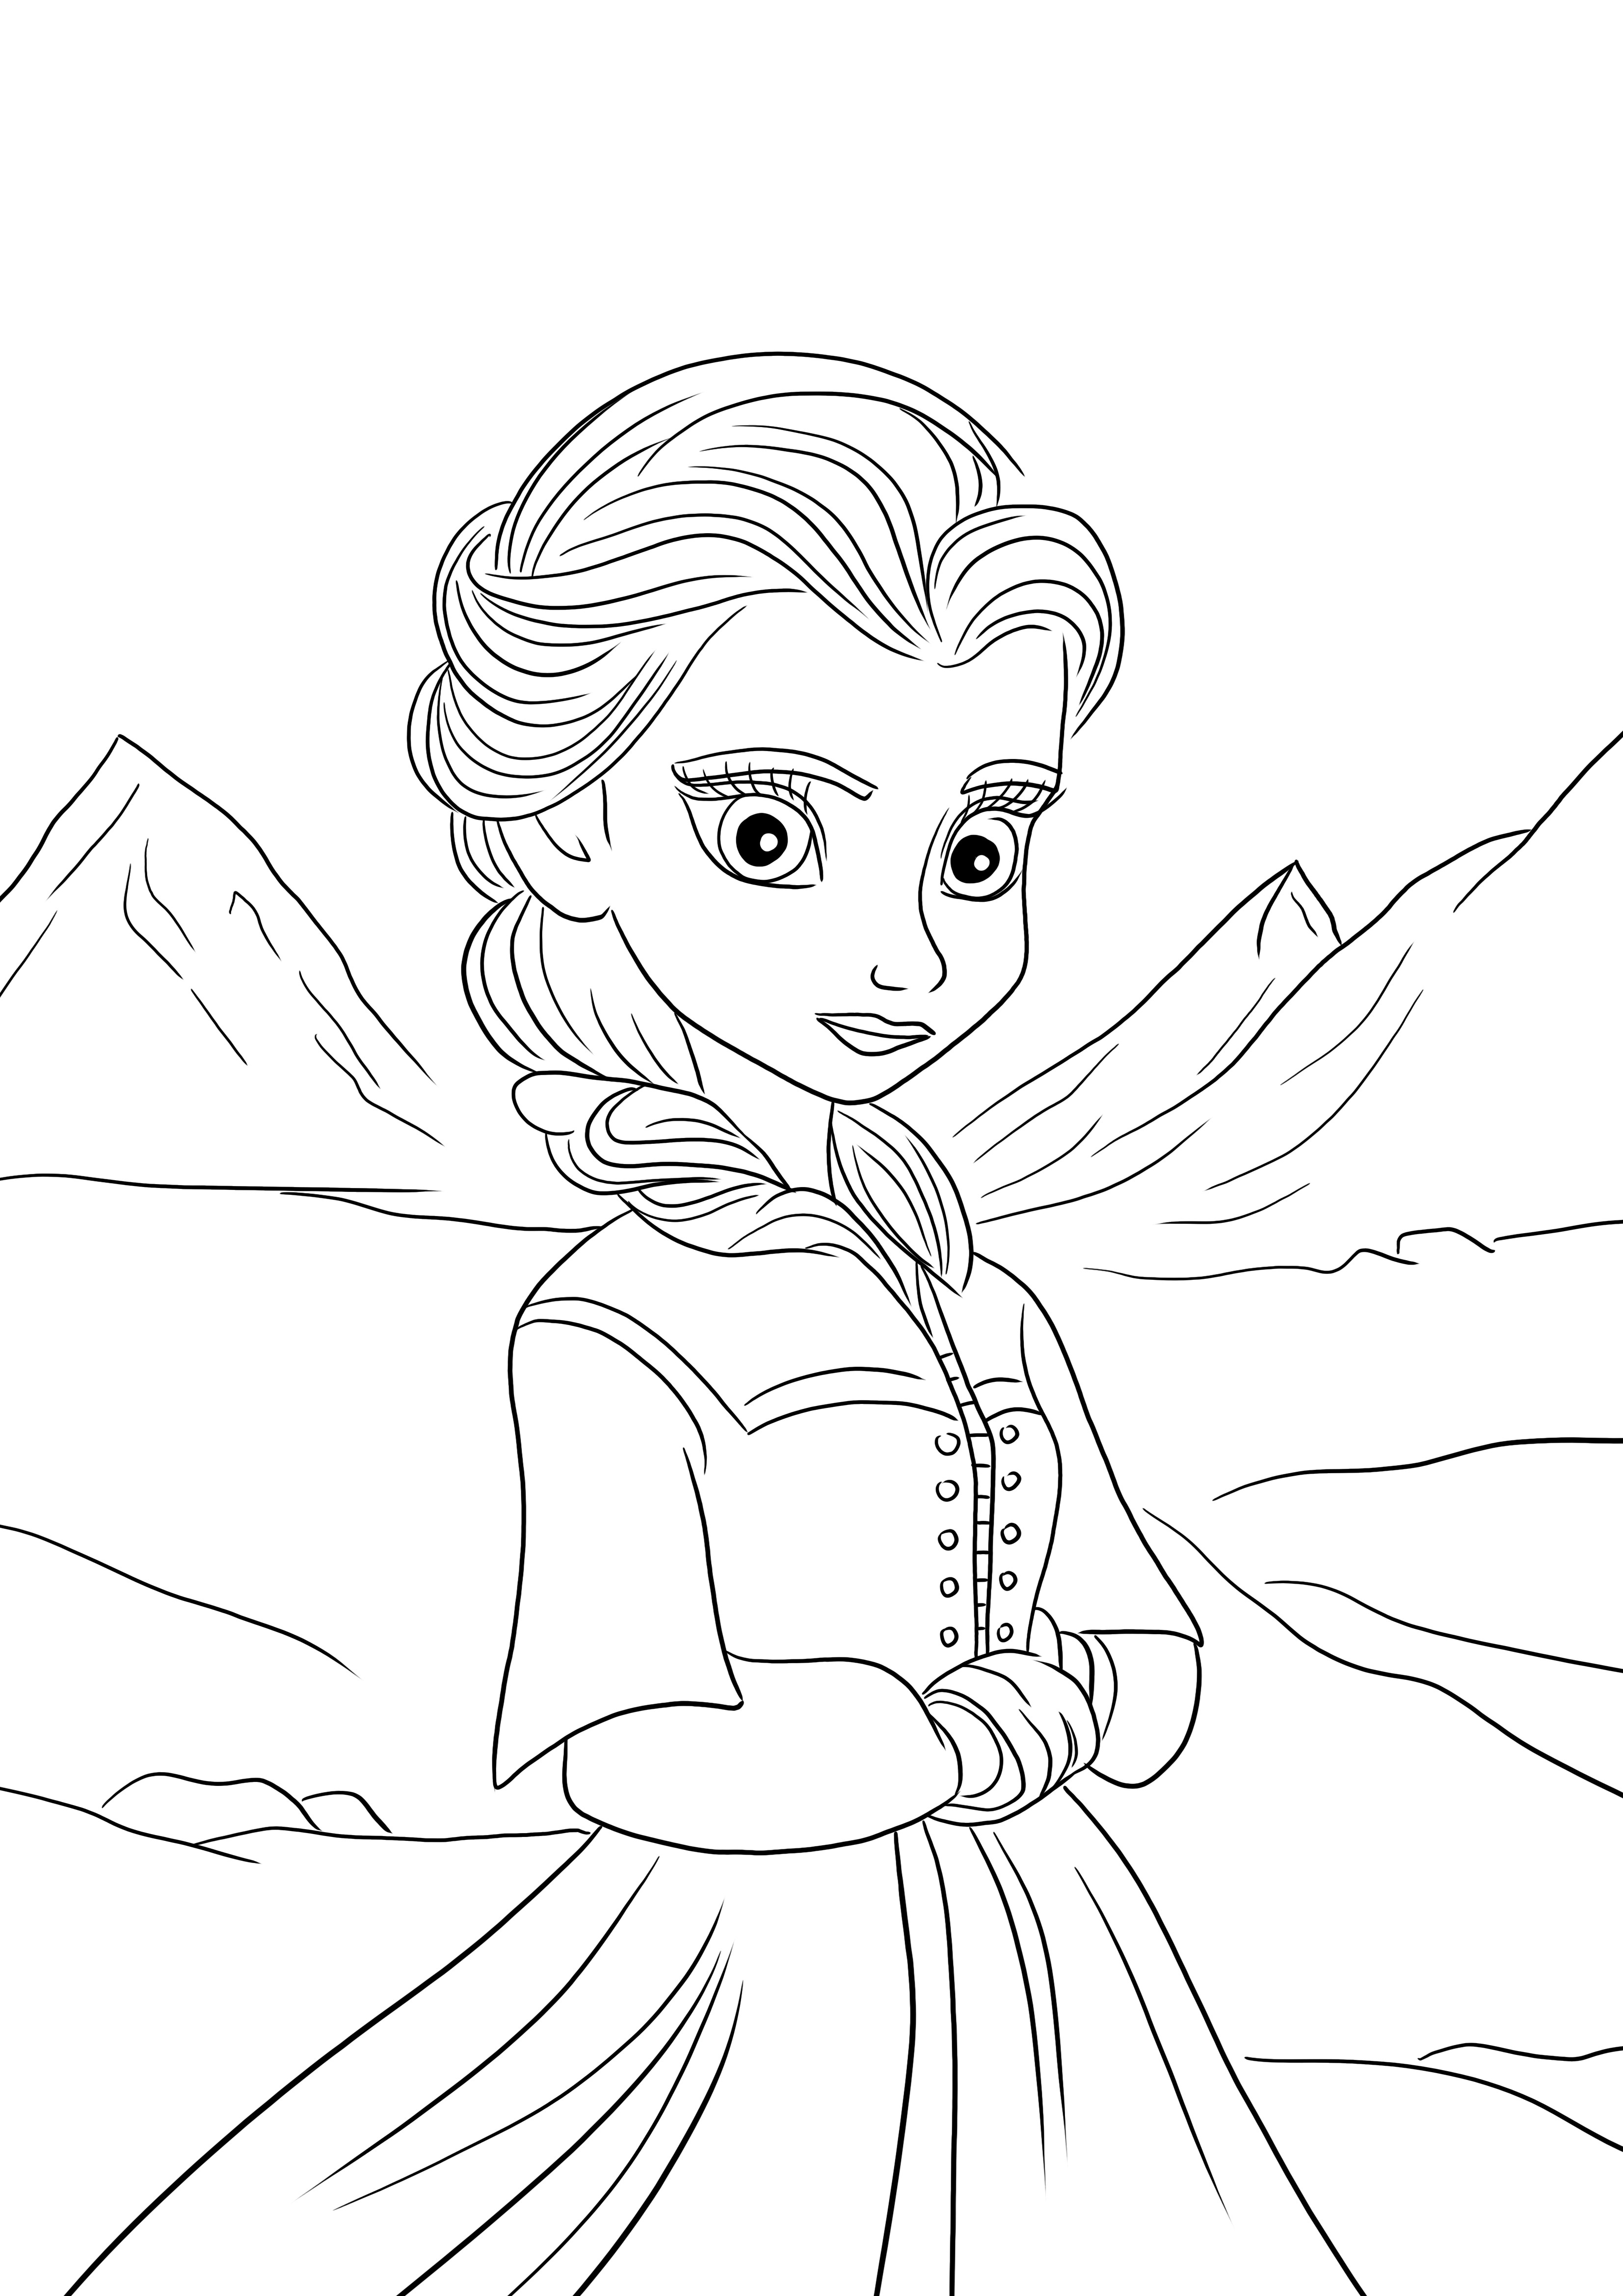 Elsa in the mountains for free coloring and printing image